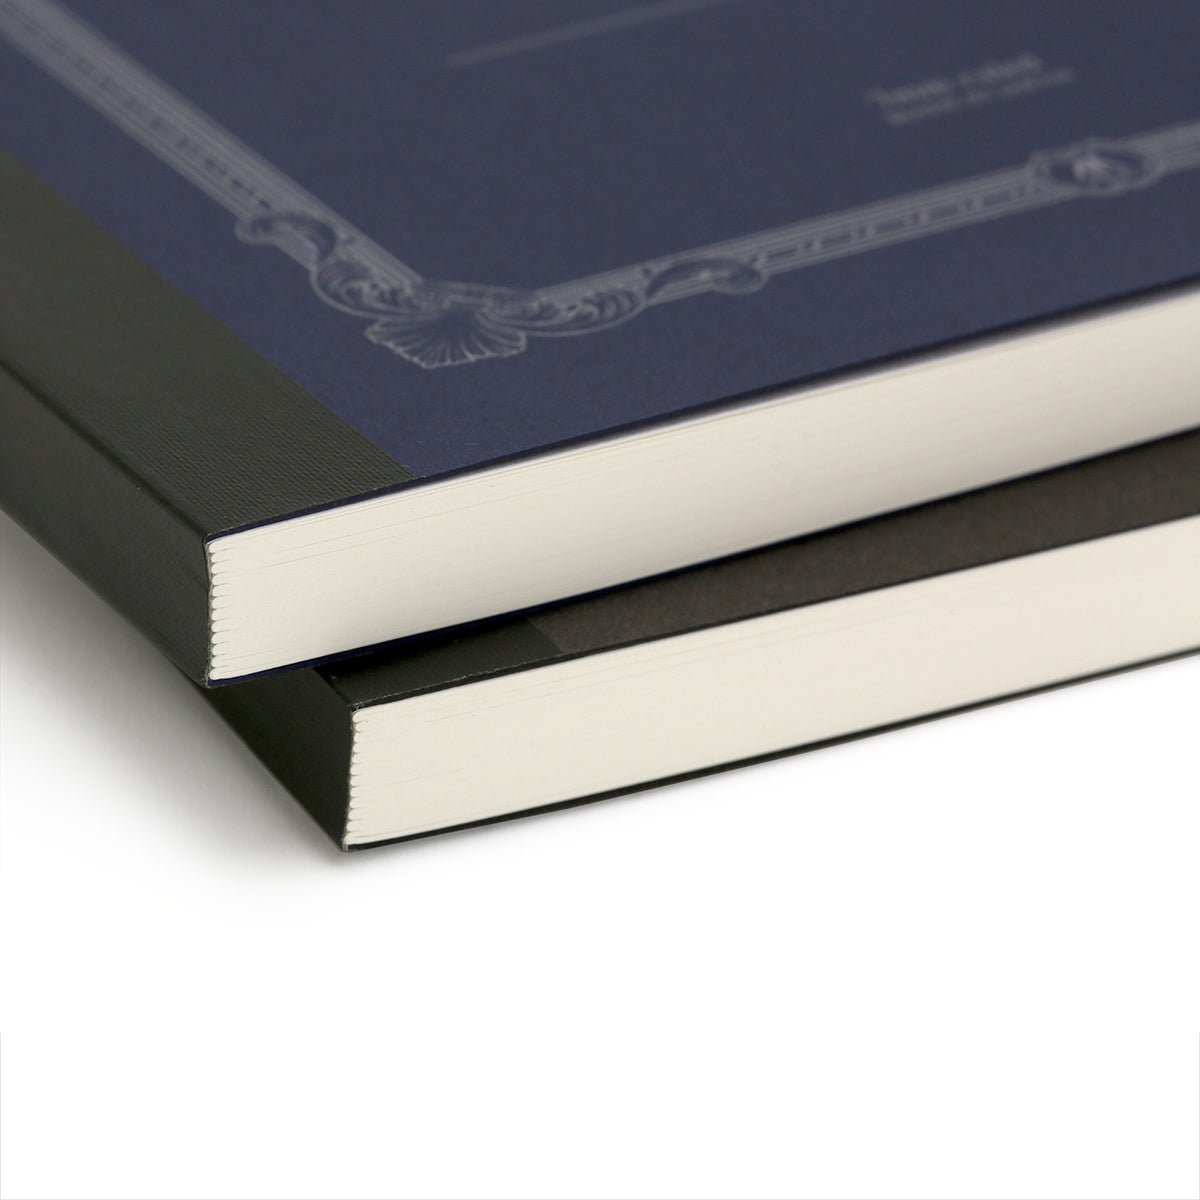 end profile of Apica CD premium notebooks shoing the stitched sections and fabric covered spine